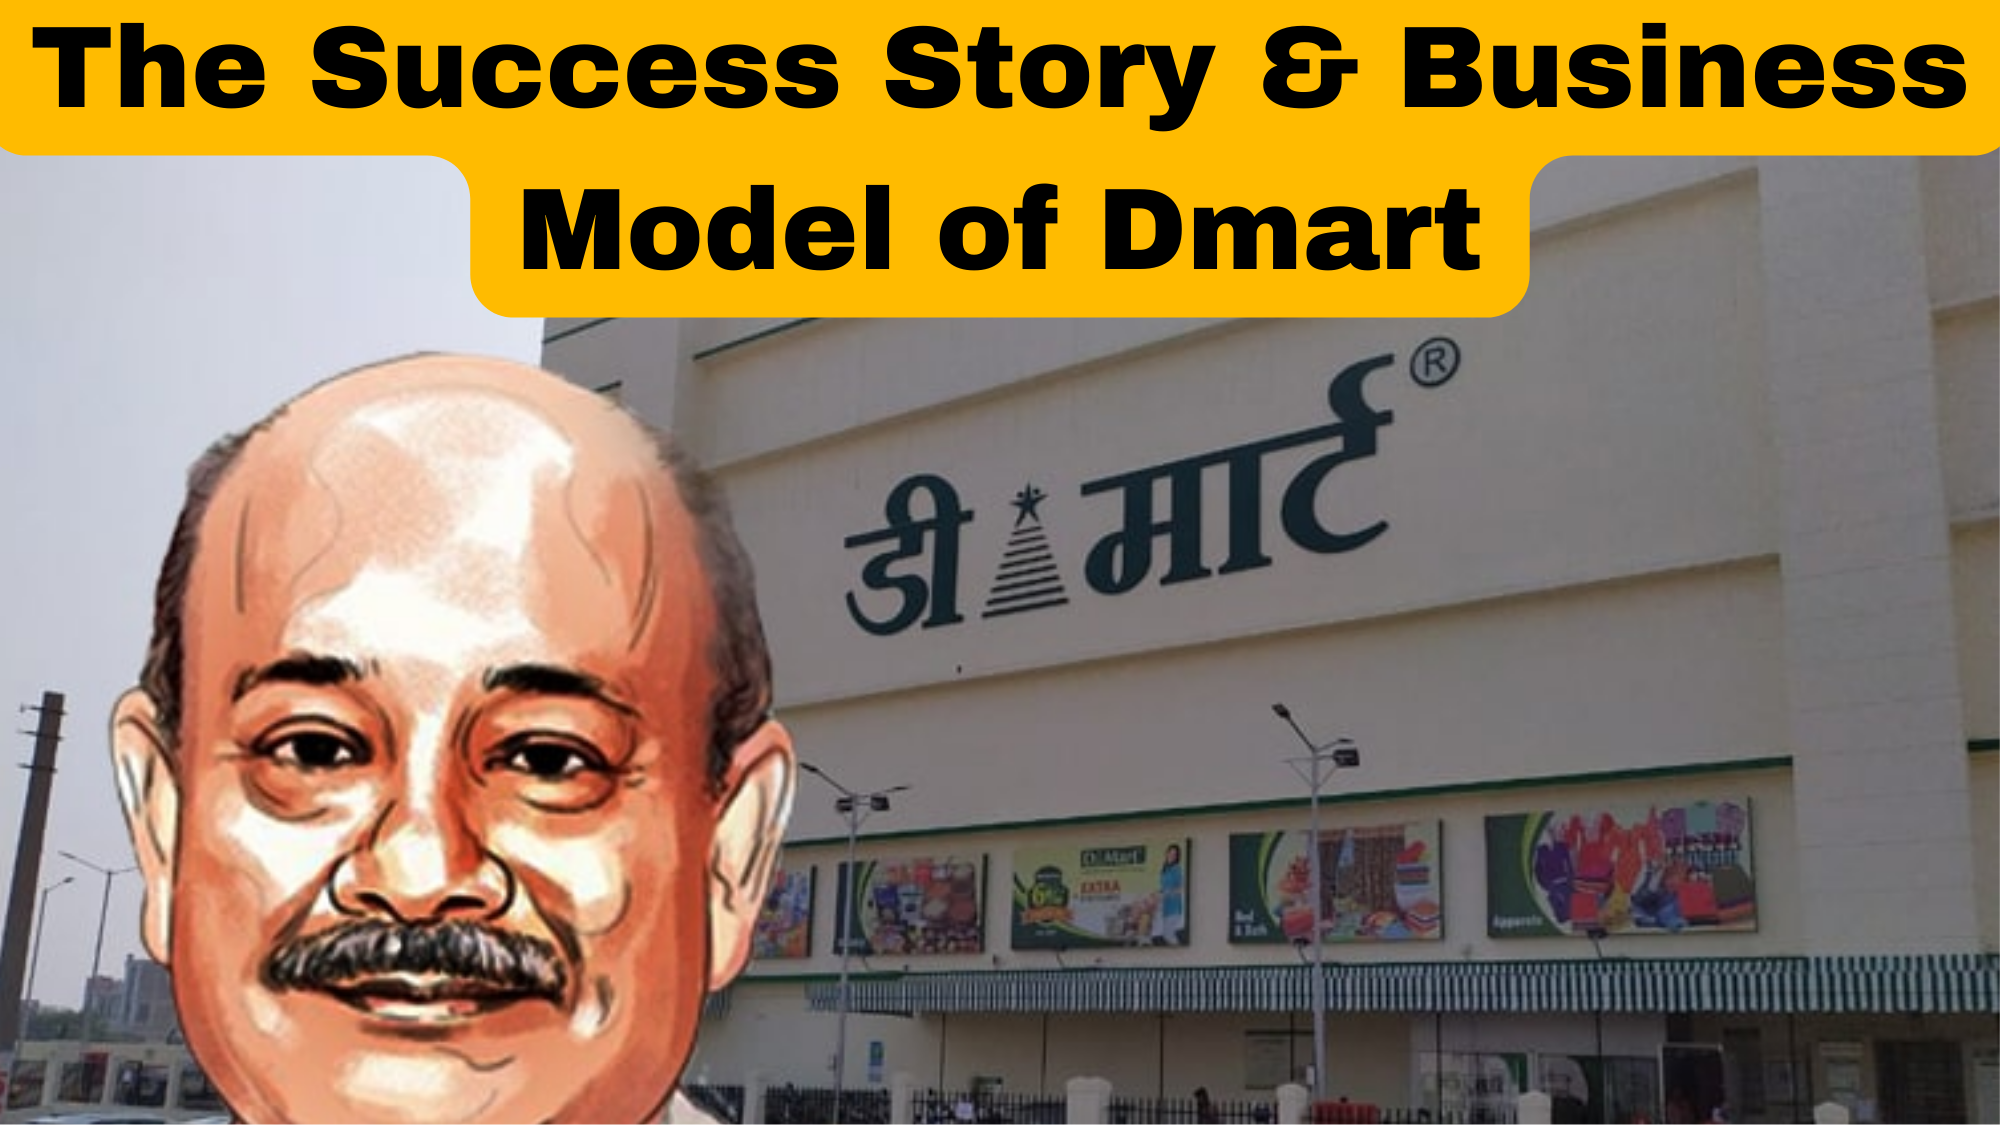 The Success Story & Business Model of Dmart